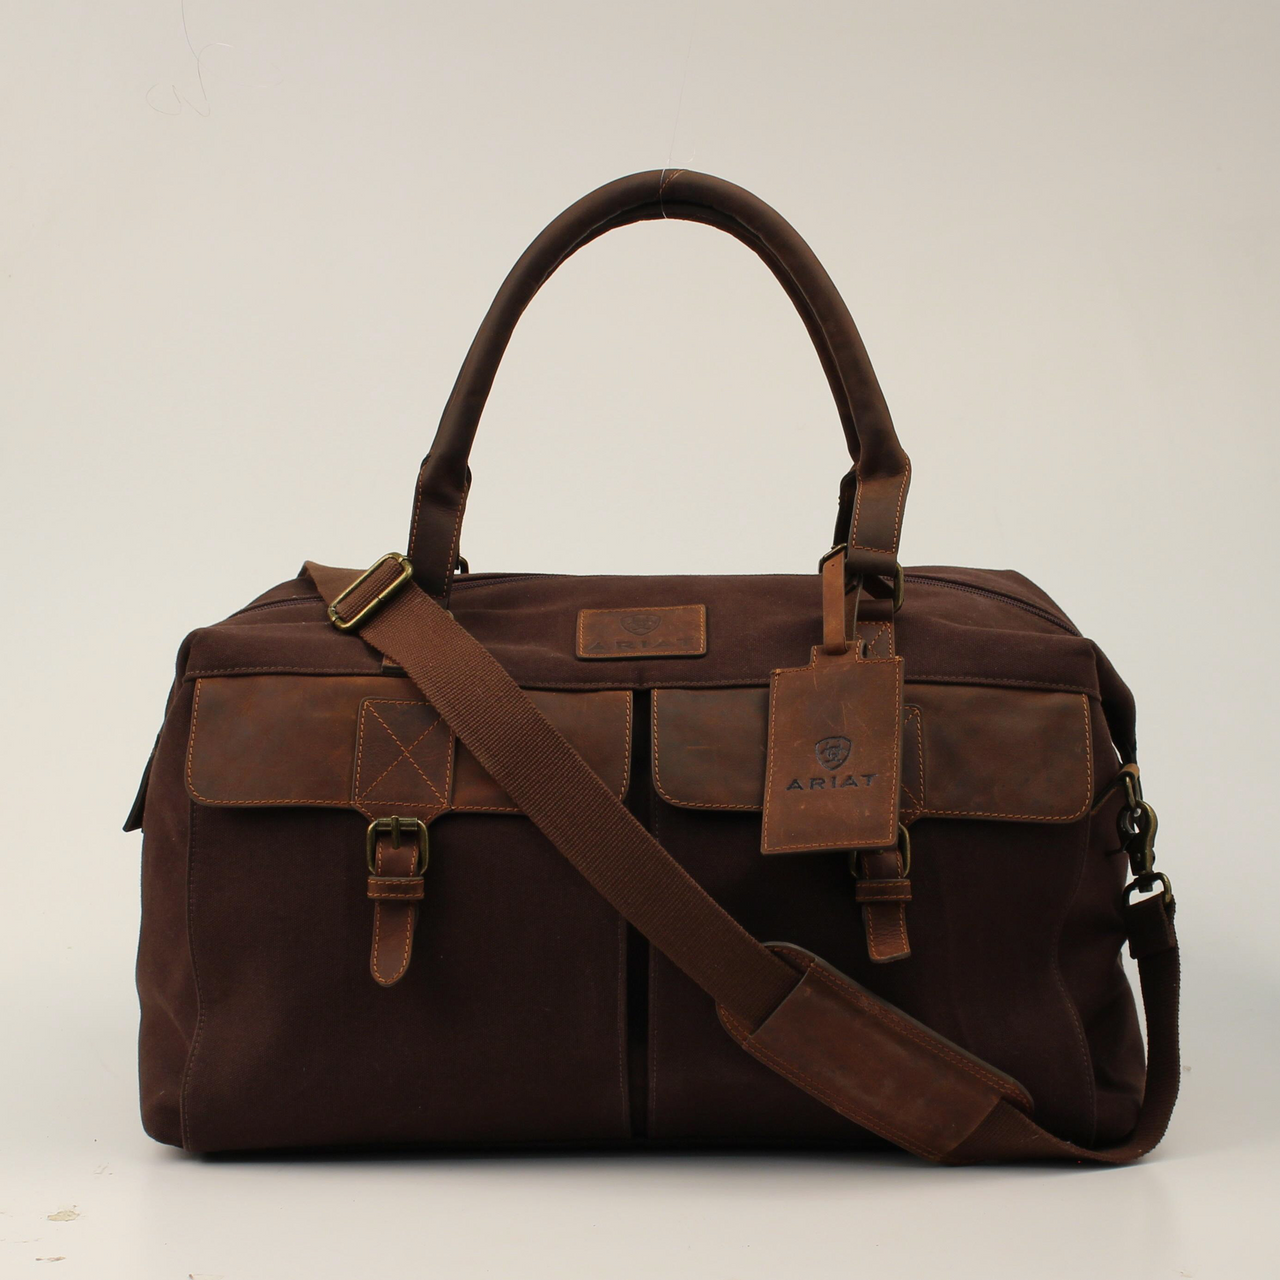 Ariat Canvas Duffle Bag - Leather Brown